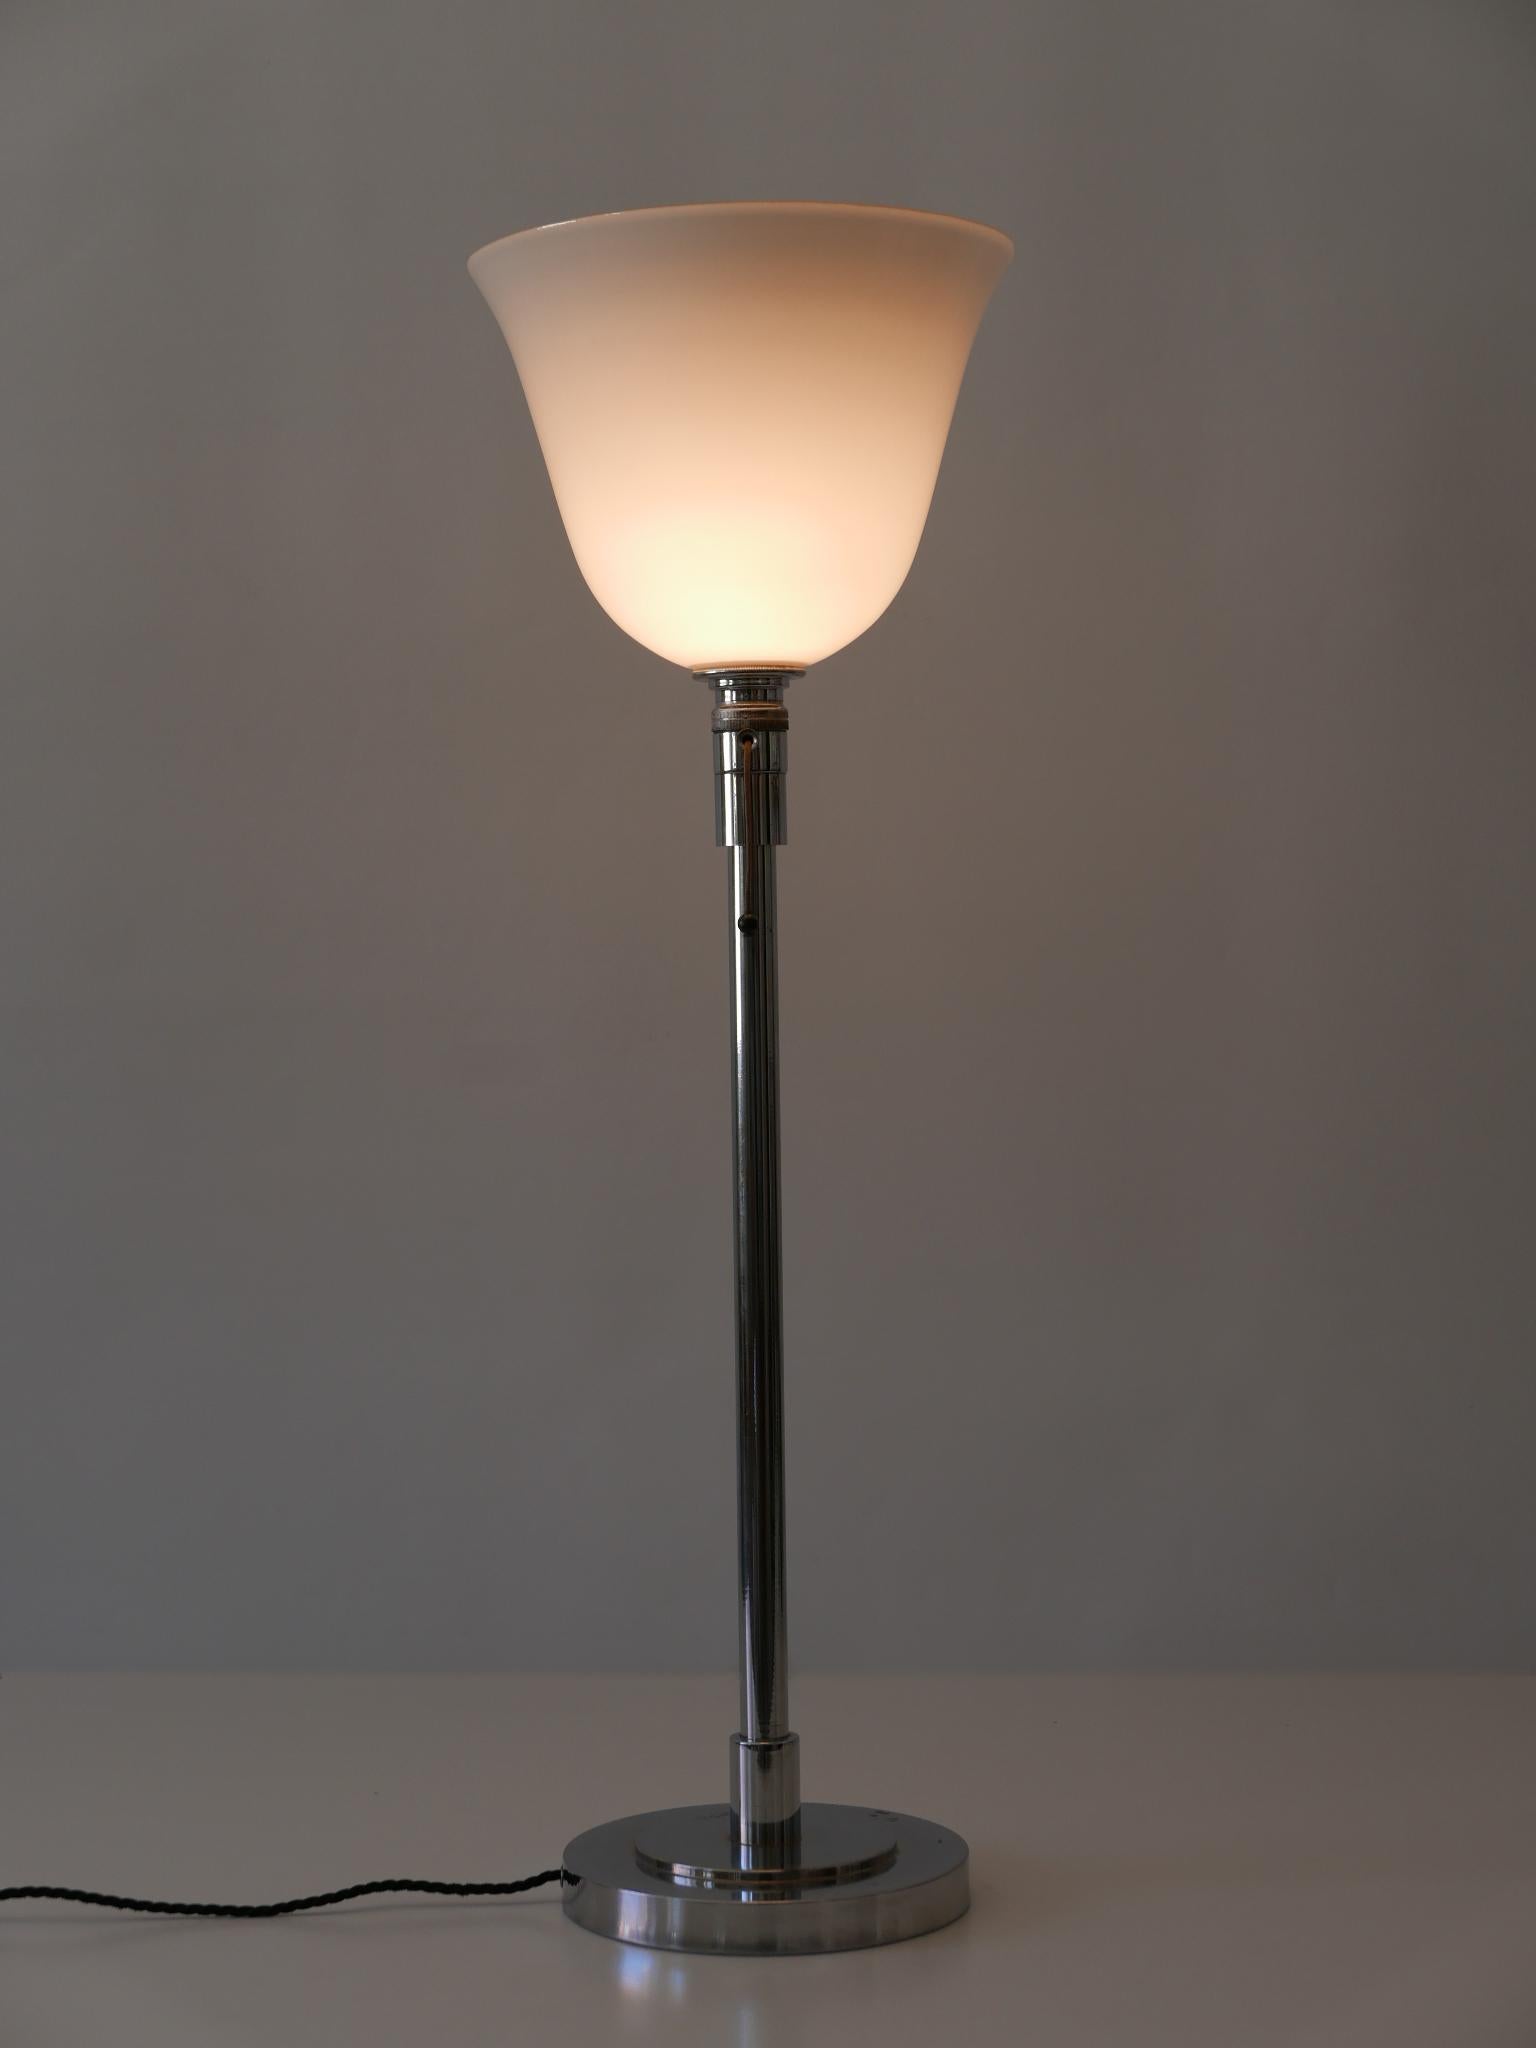 Elegant Art Deco / Bauhaus floor or table lamp. Designed and manufactured by Mazda, 1930s, Paris, France.

Executed in nickel-plated brass and opaline glass, the lamp needs 1 x E27 / E 26 Edison screw fit bulb, is wired, and in working condition.